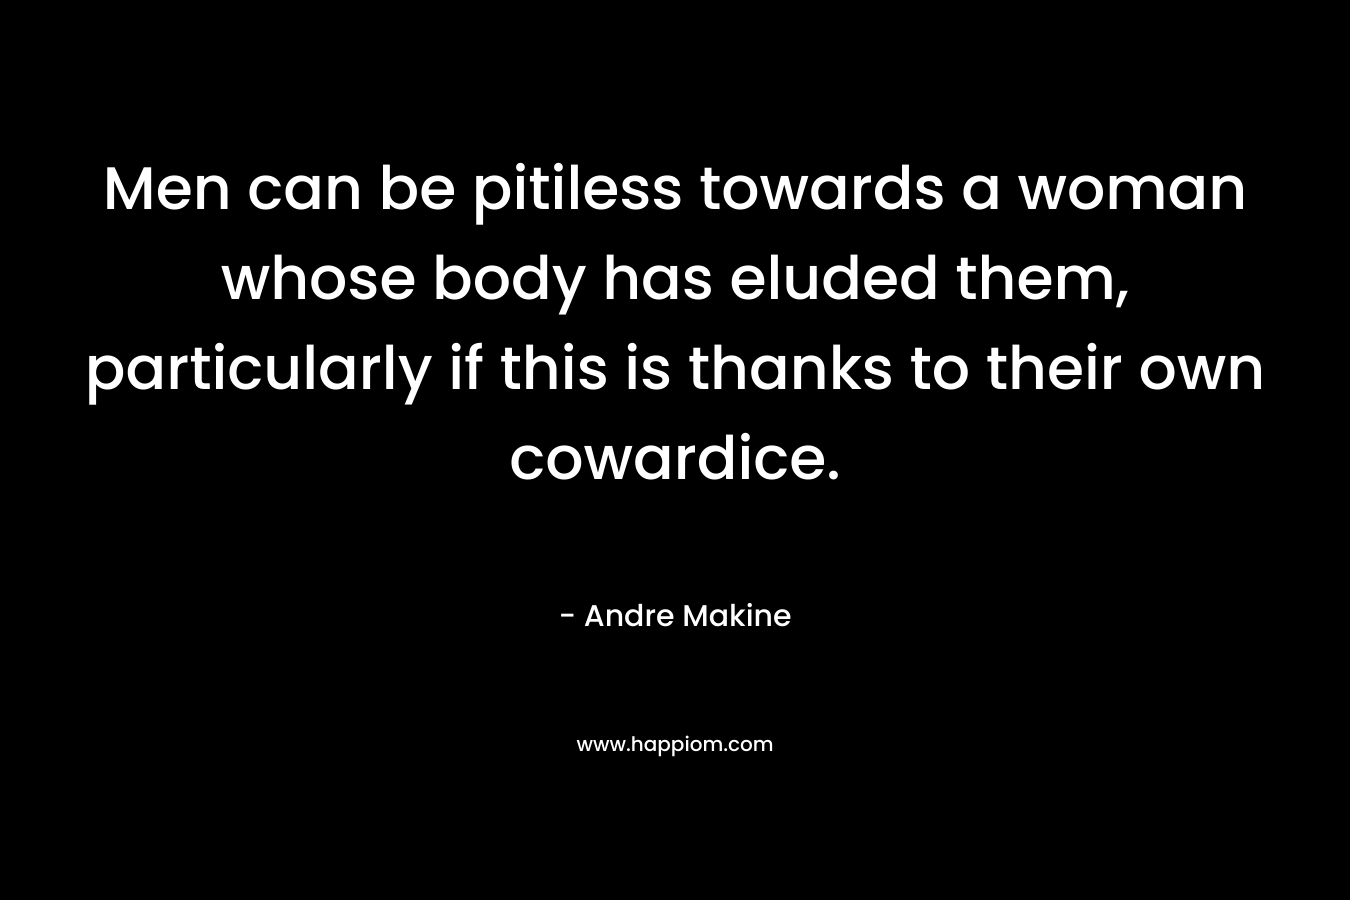 Men can be pitiless towards a woman whose body has eluded them, particularly if this is thanks to their own cowardice. – Andre Makine